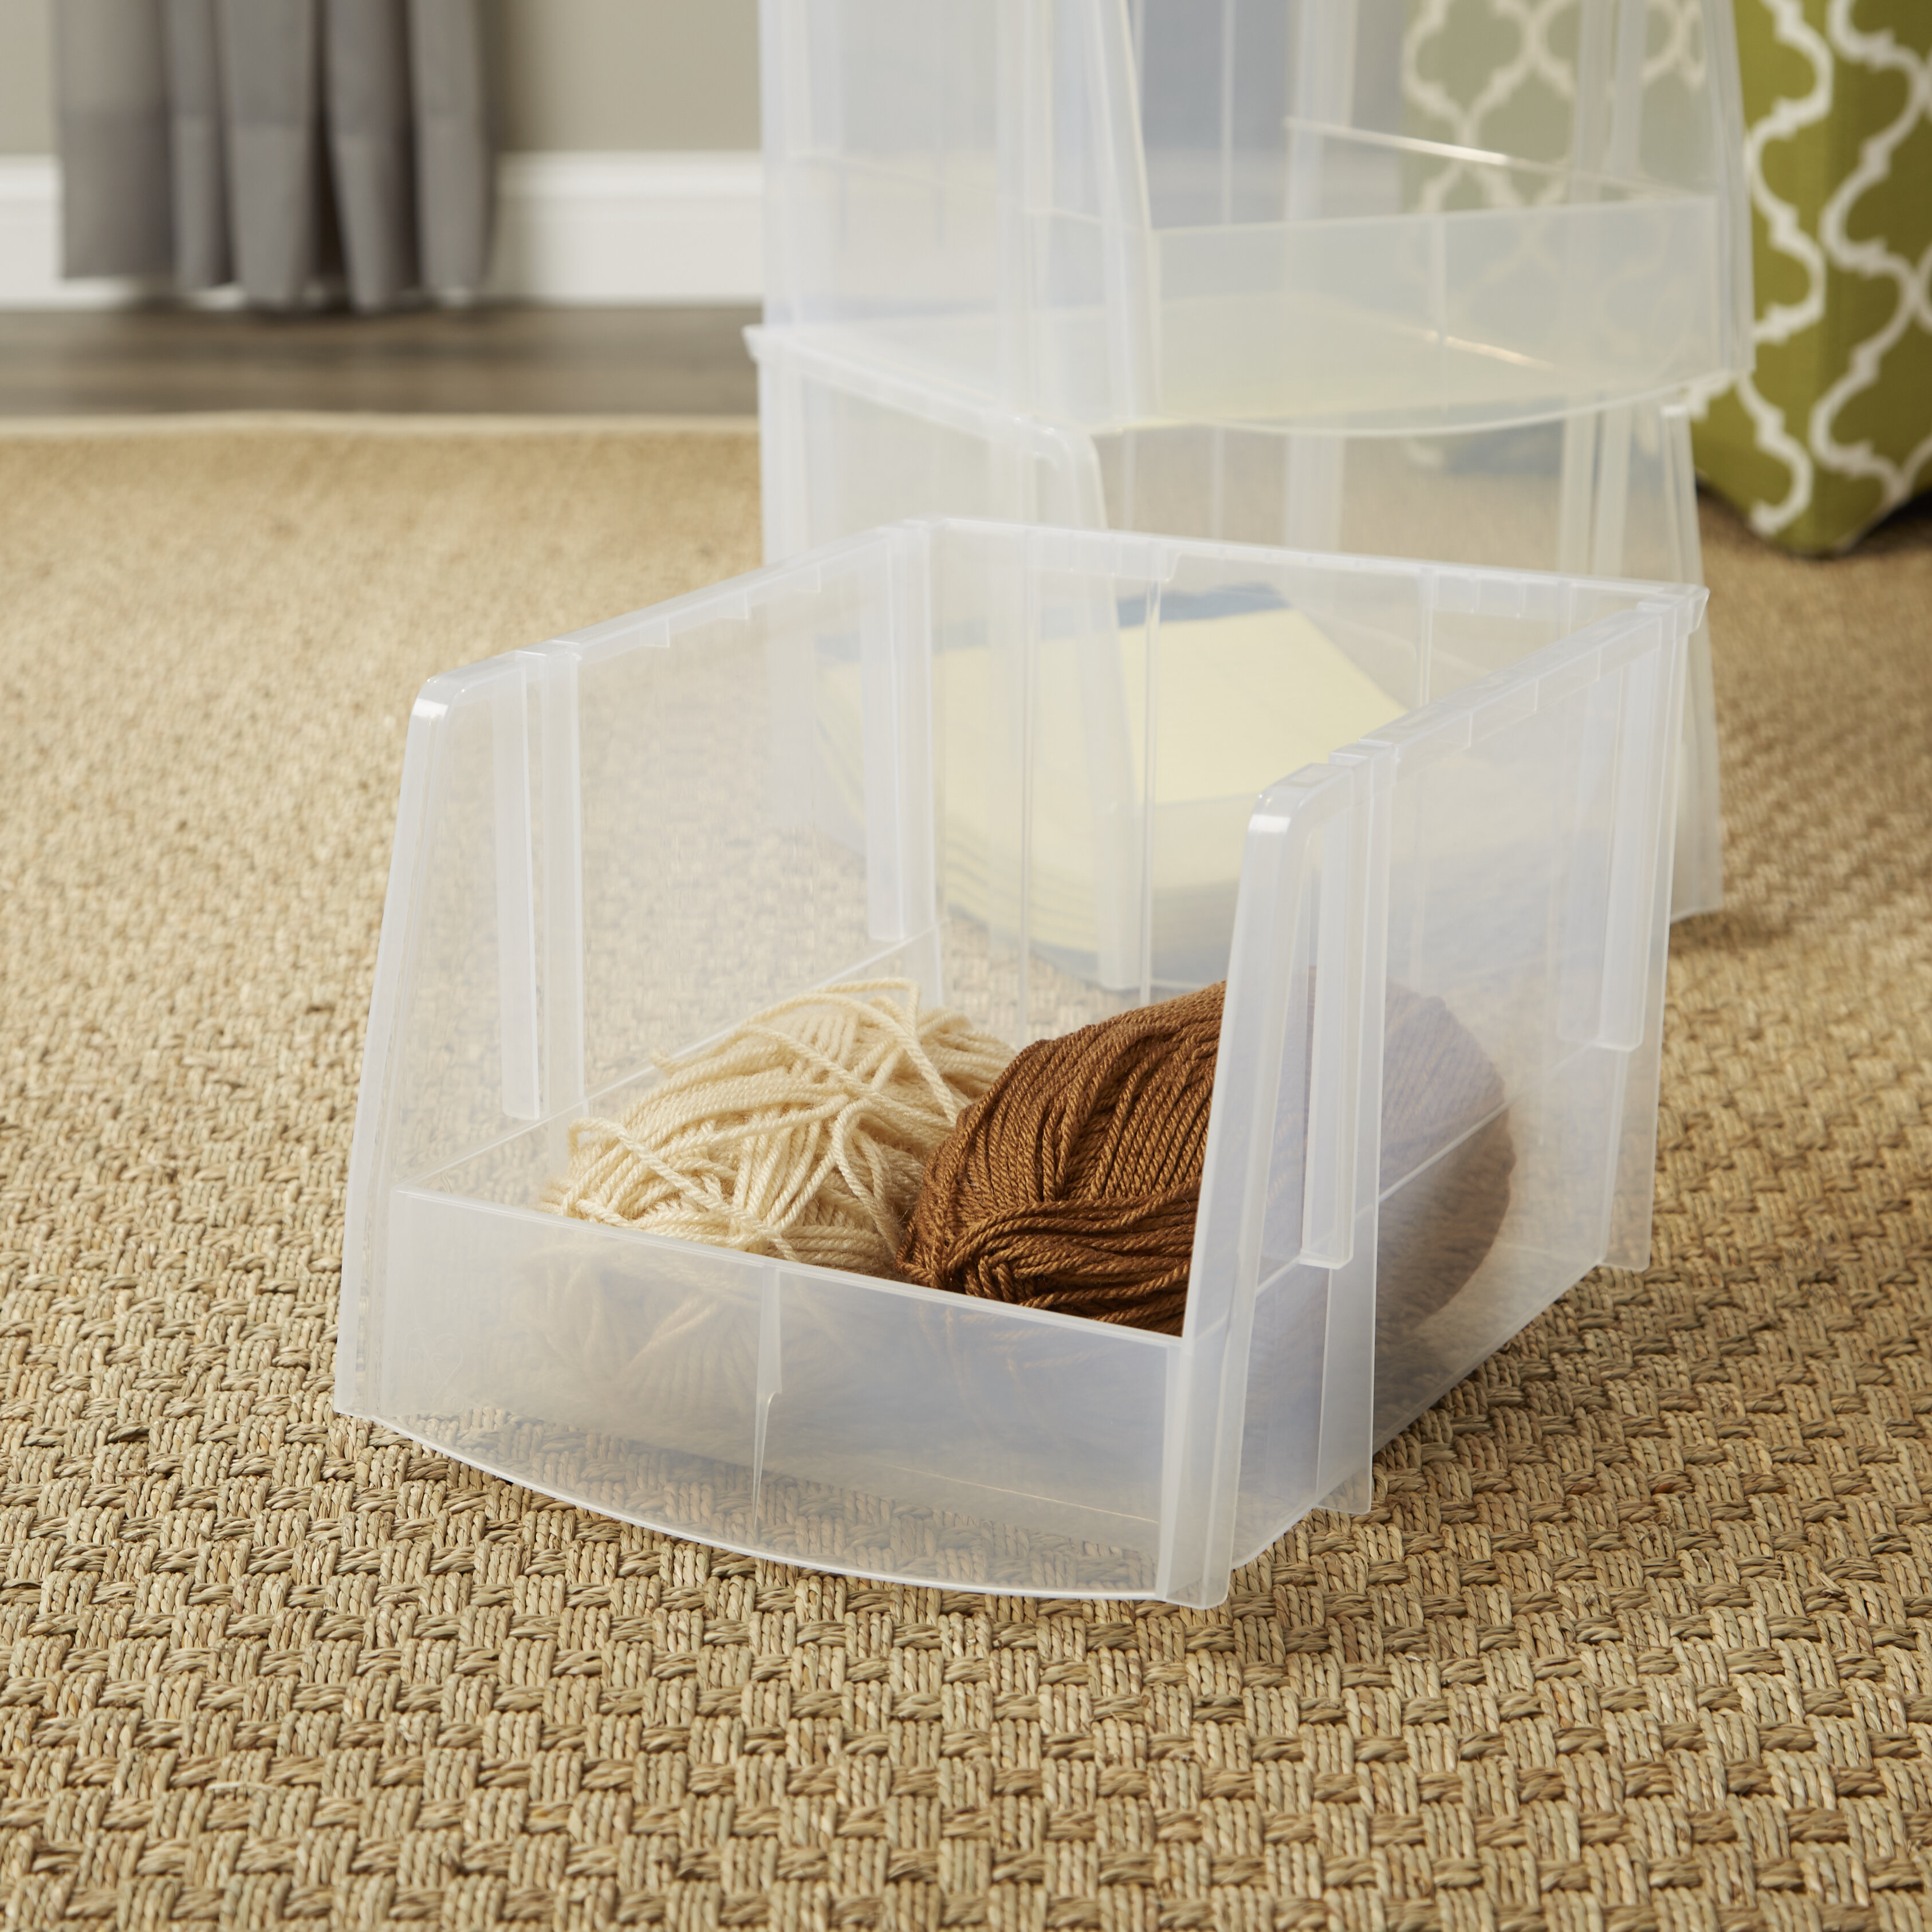 Narrow (less than 6 wide) Storage Containers You'll Love